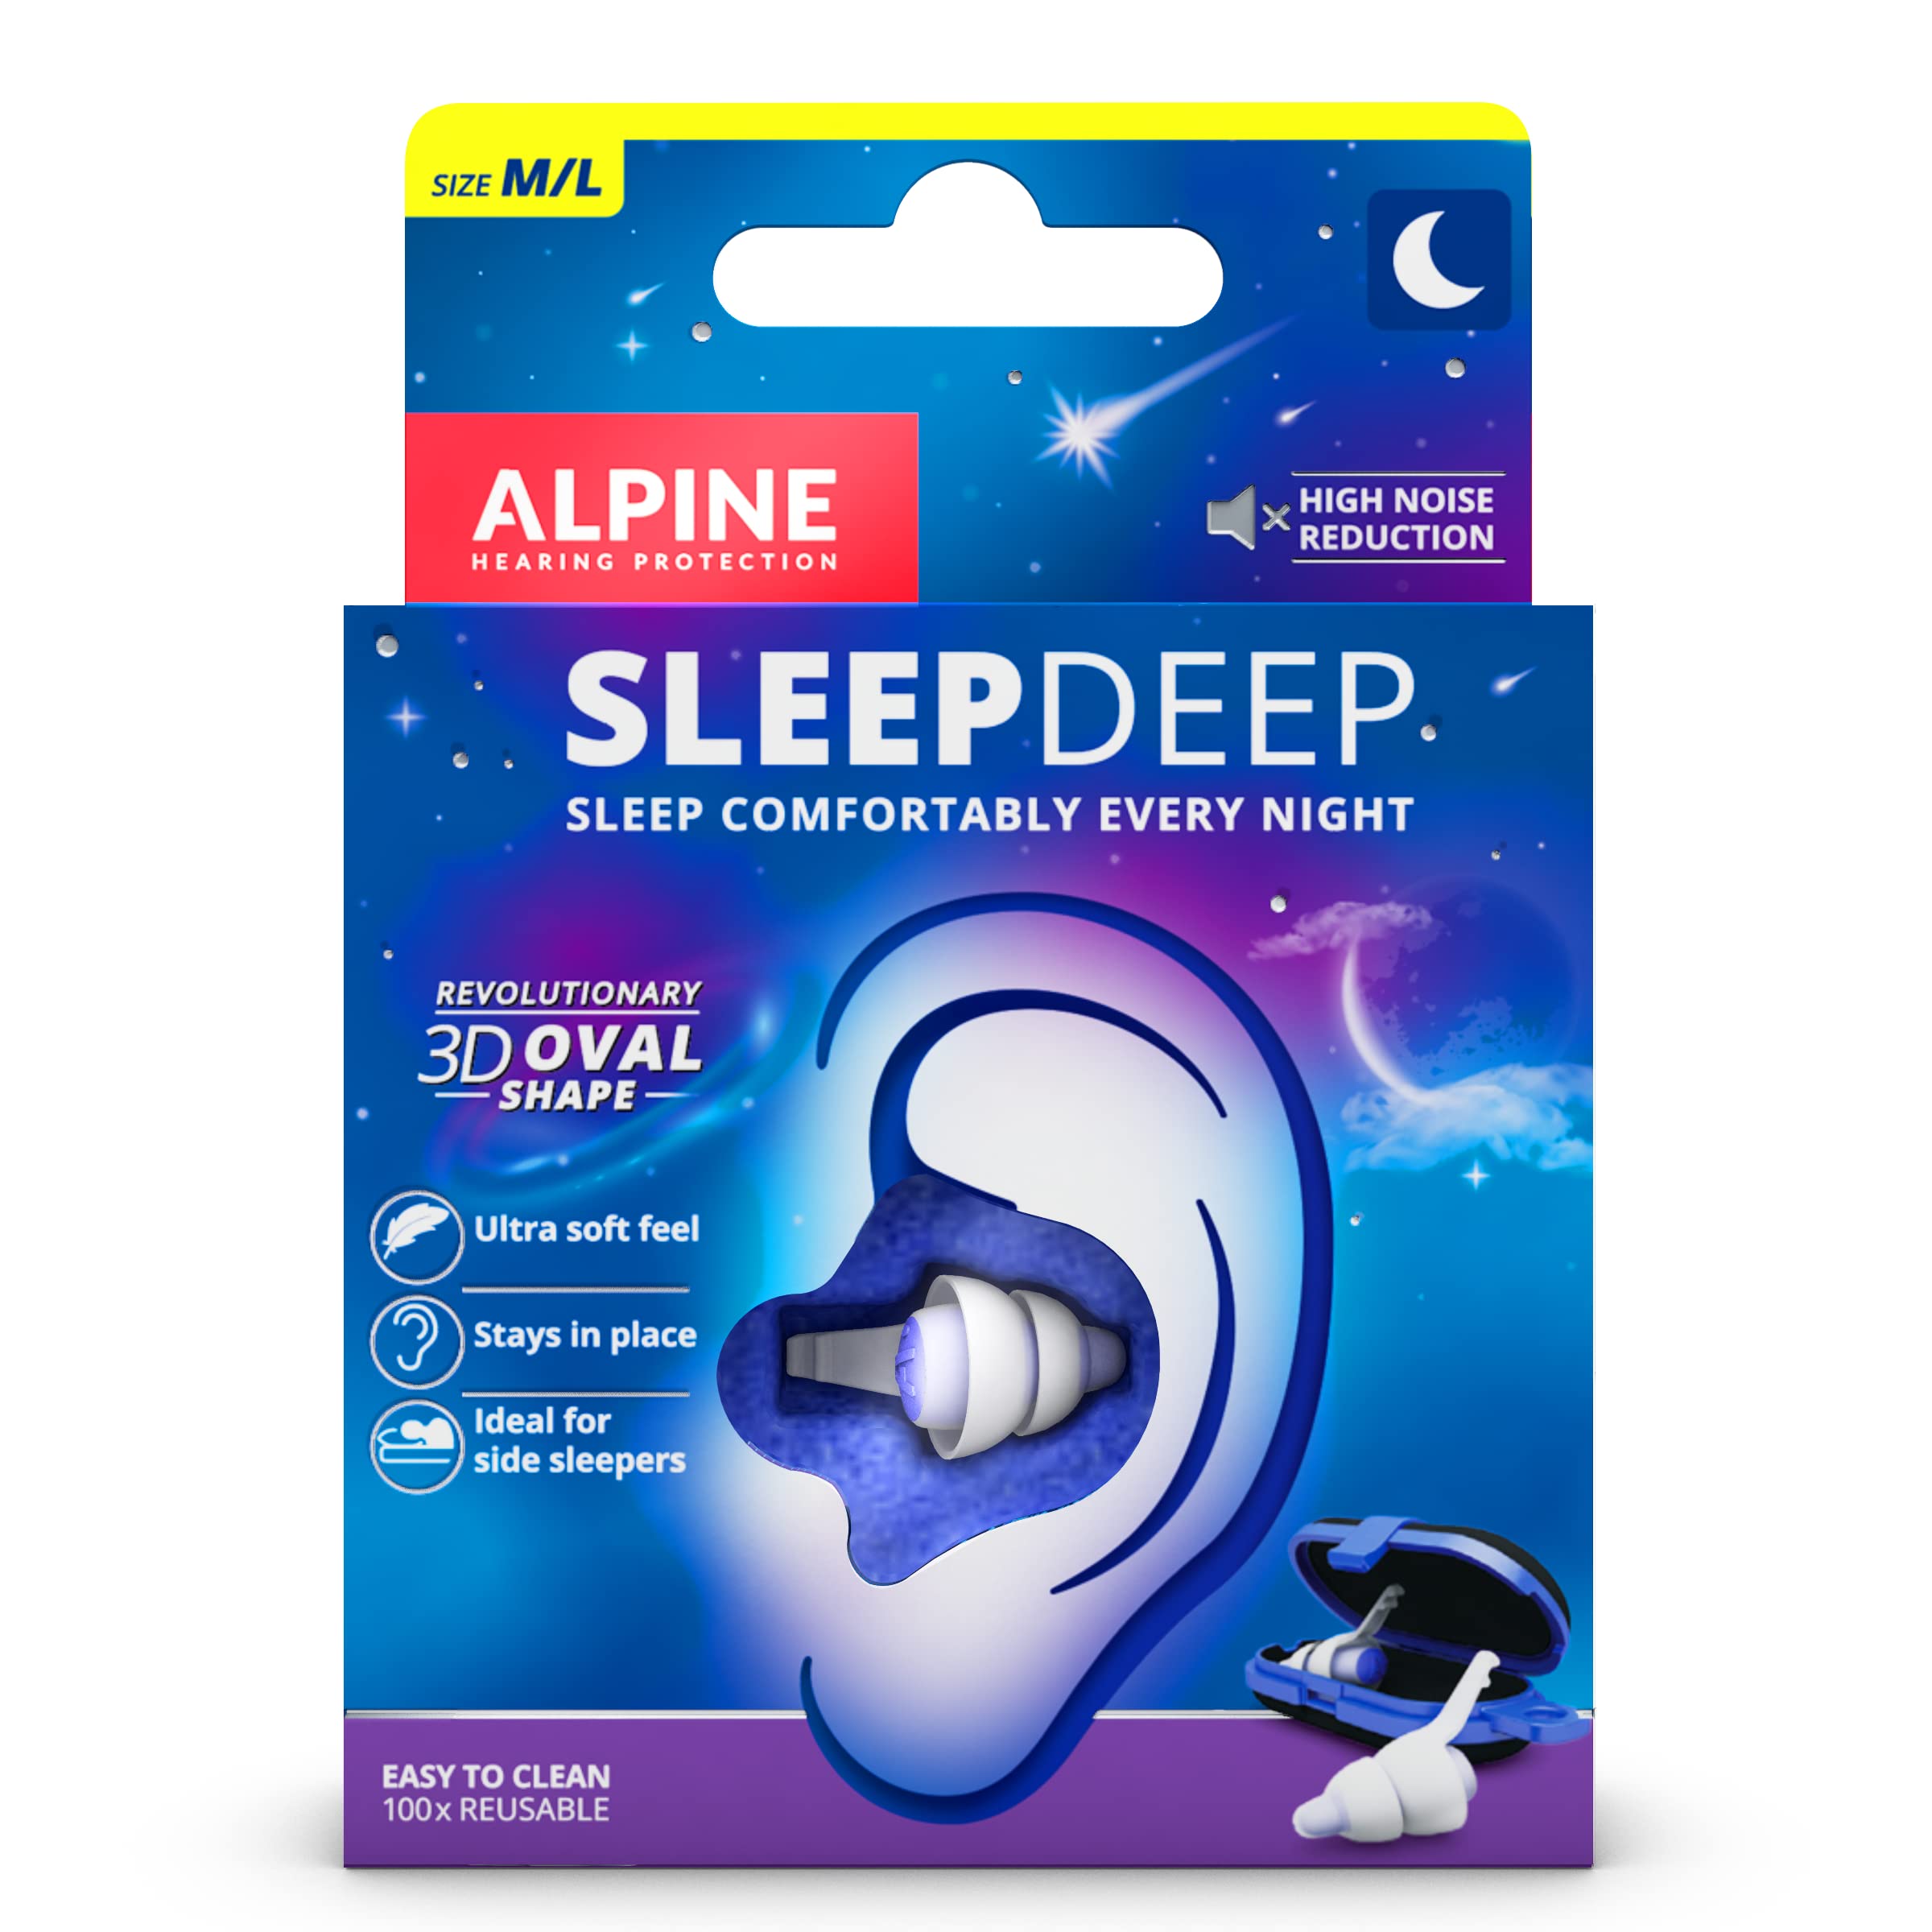 Alpine SleepDeep - Soft Ear Plugs for Sleeping and Concentration - New 3D Oval Shape and Noise Reducing Gel for Better Attenuation - 27 dB - Ideal for Side Sleeper - 1-Pair Reusable: M/L